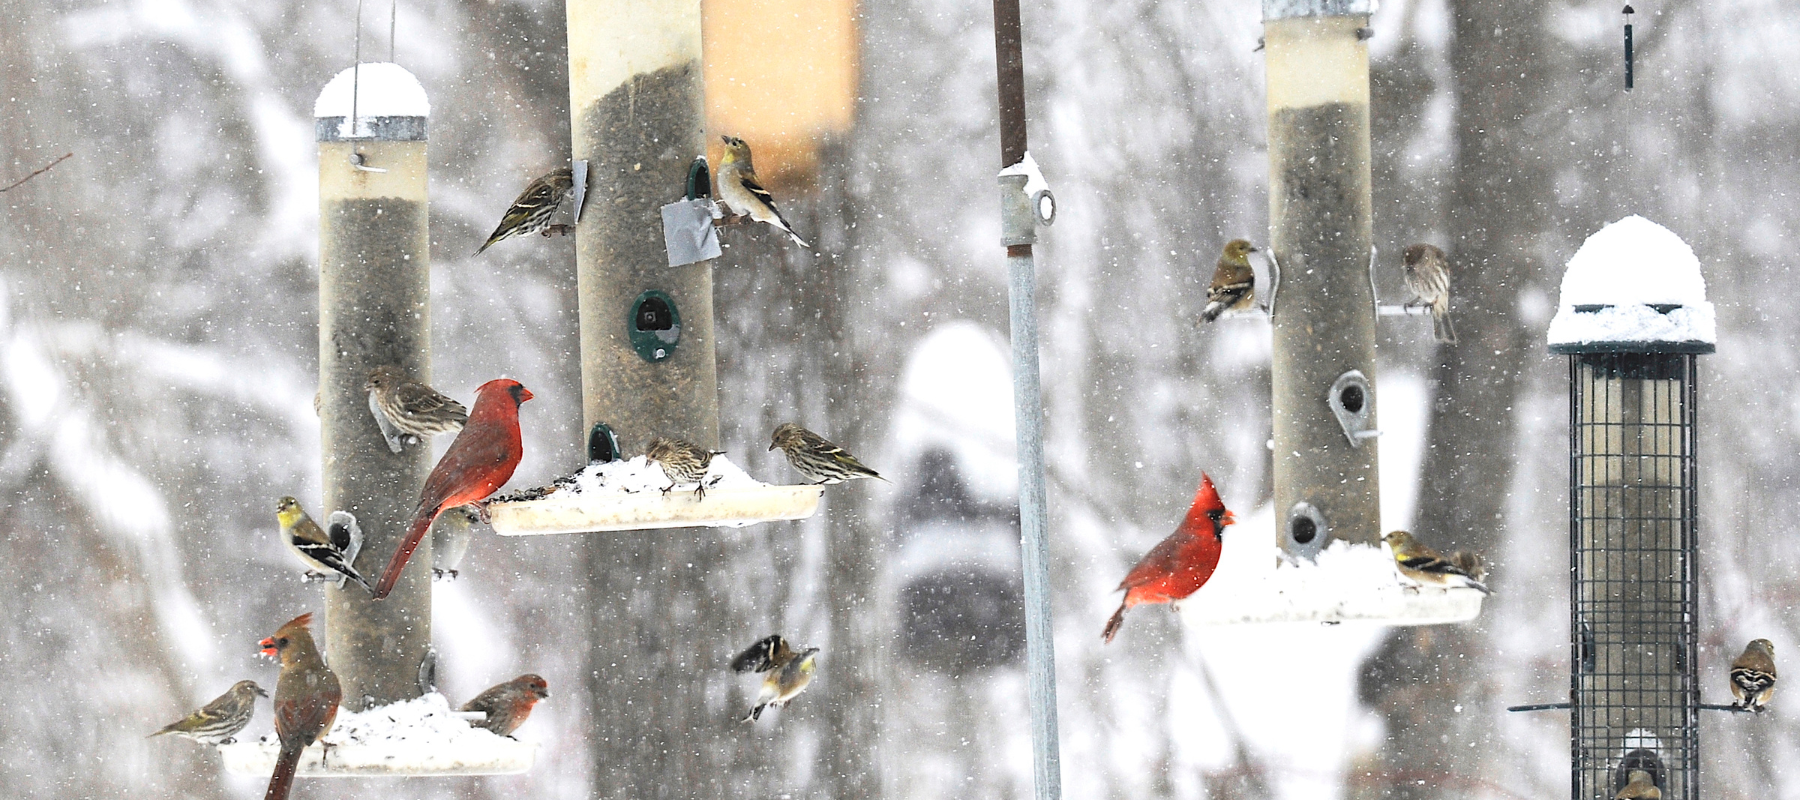 How to Attract Birds During Winter: Heated Bird Baths and More